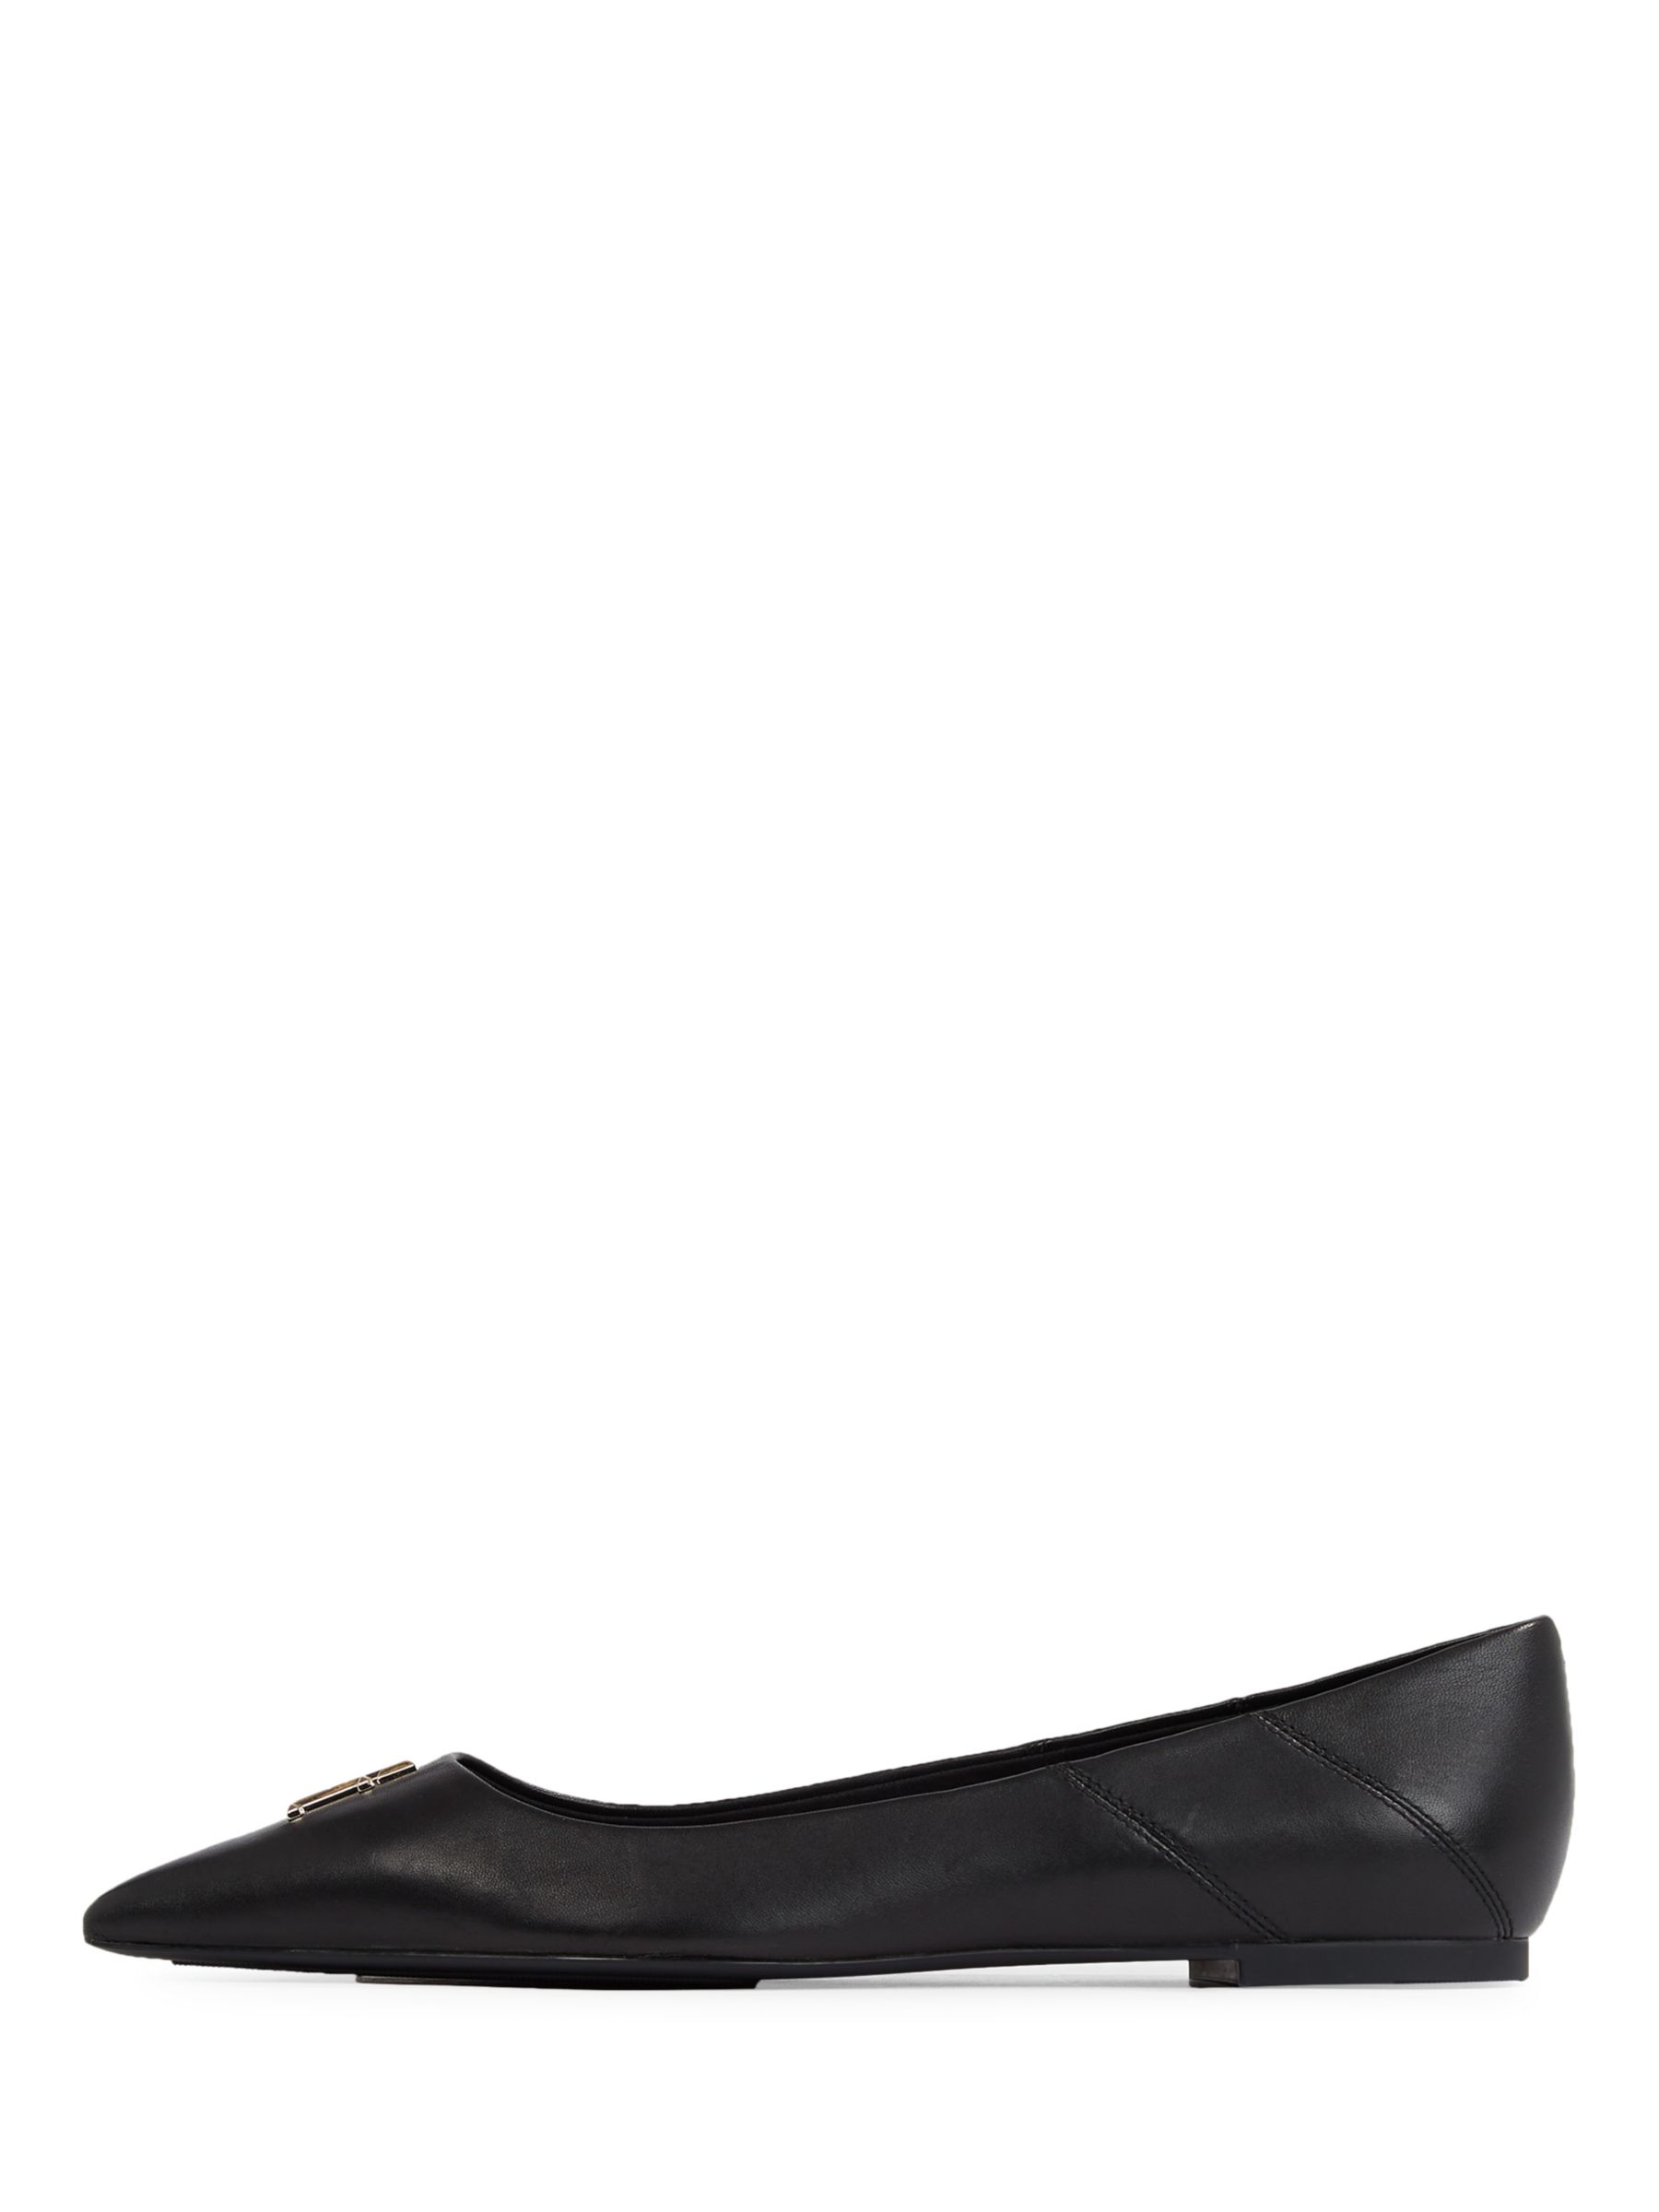 Tommy Hilfiger Pointed Leather Ballerina Flats, Black,